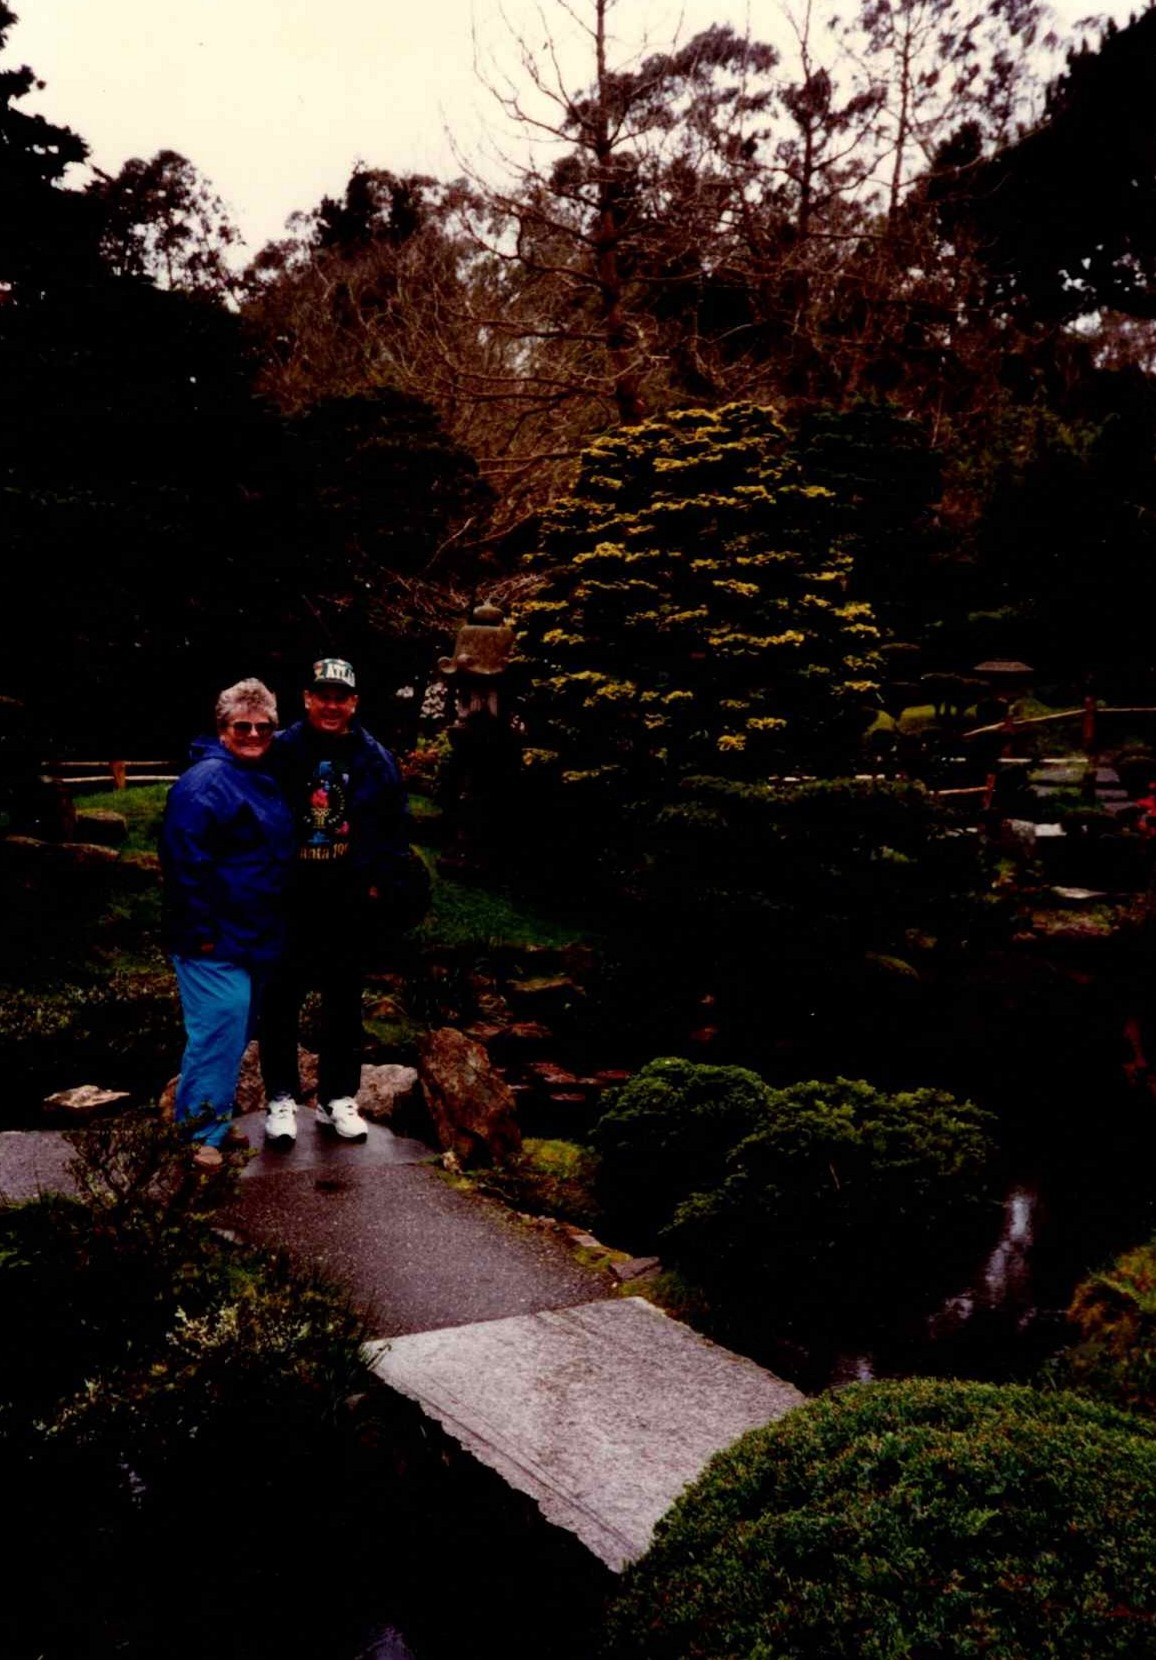 Neil and Elizabeth in the beautiful gardens